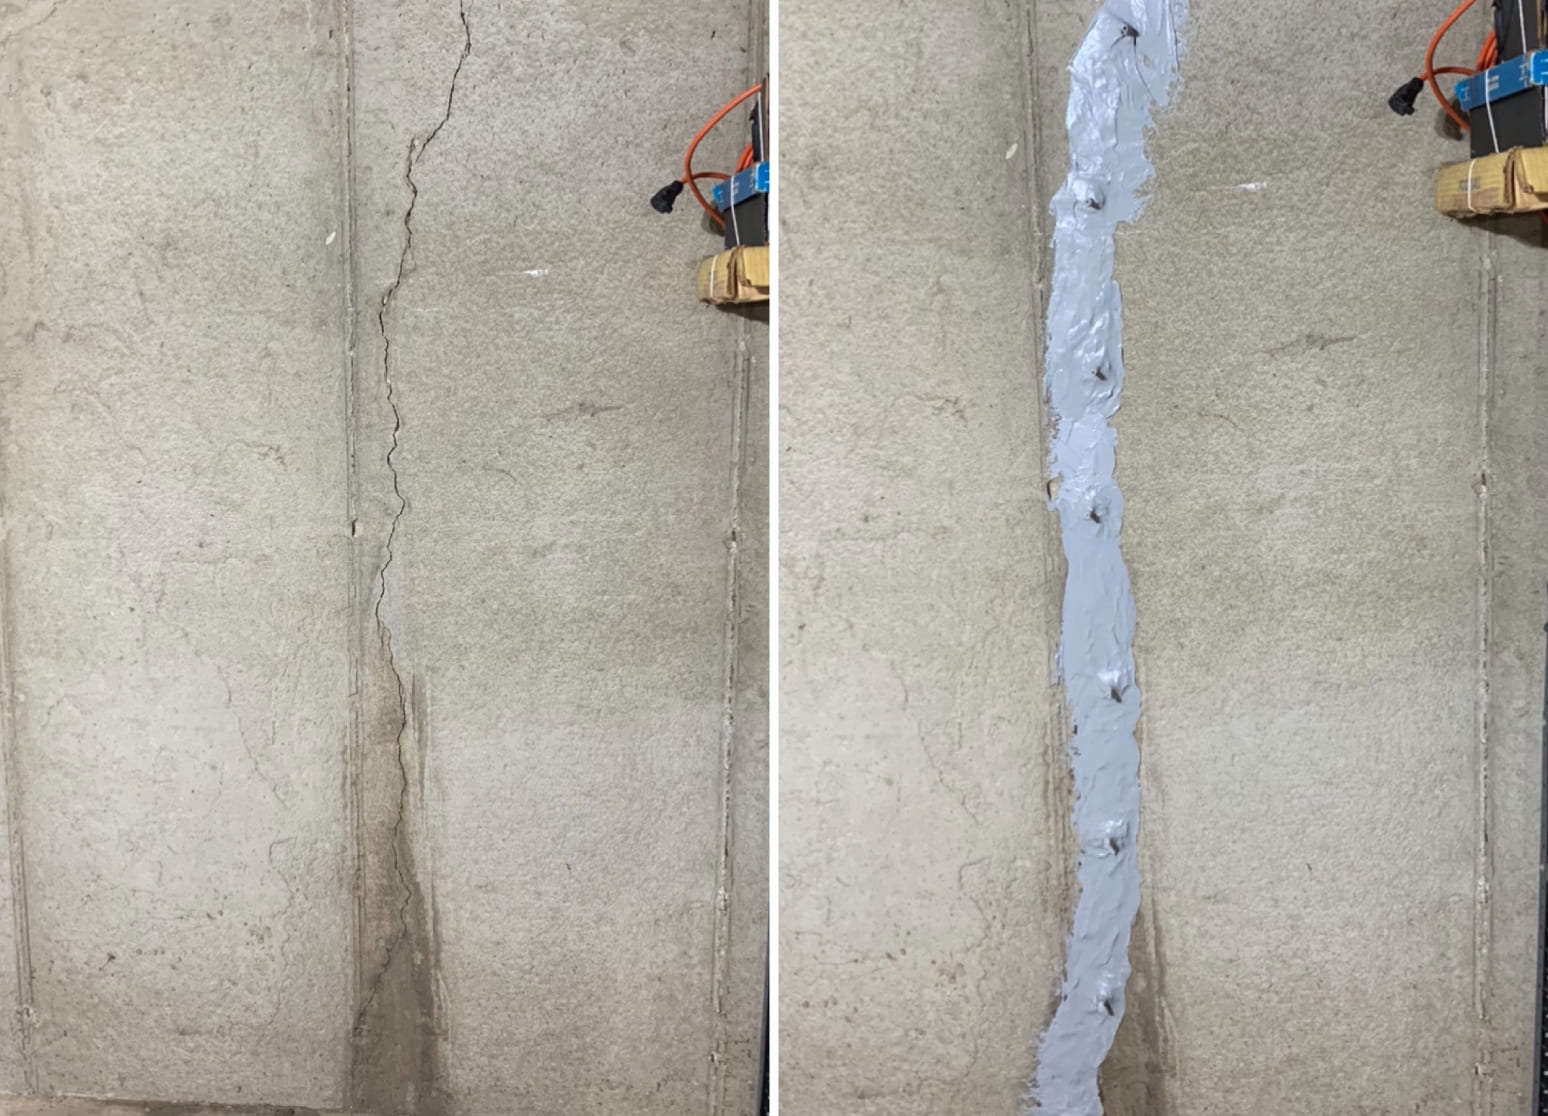 foundation wall crack, before and after pictures